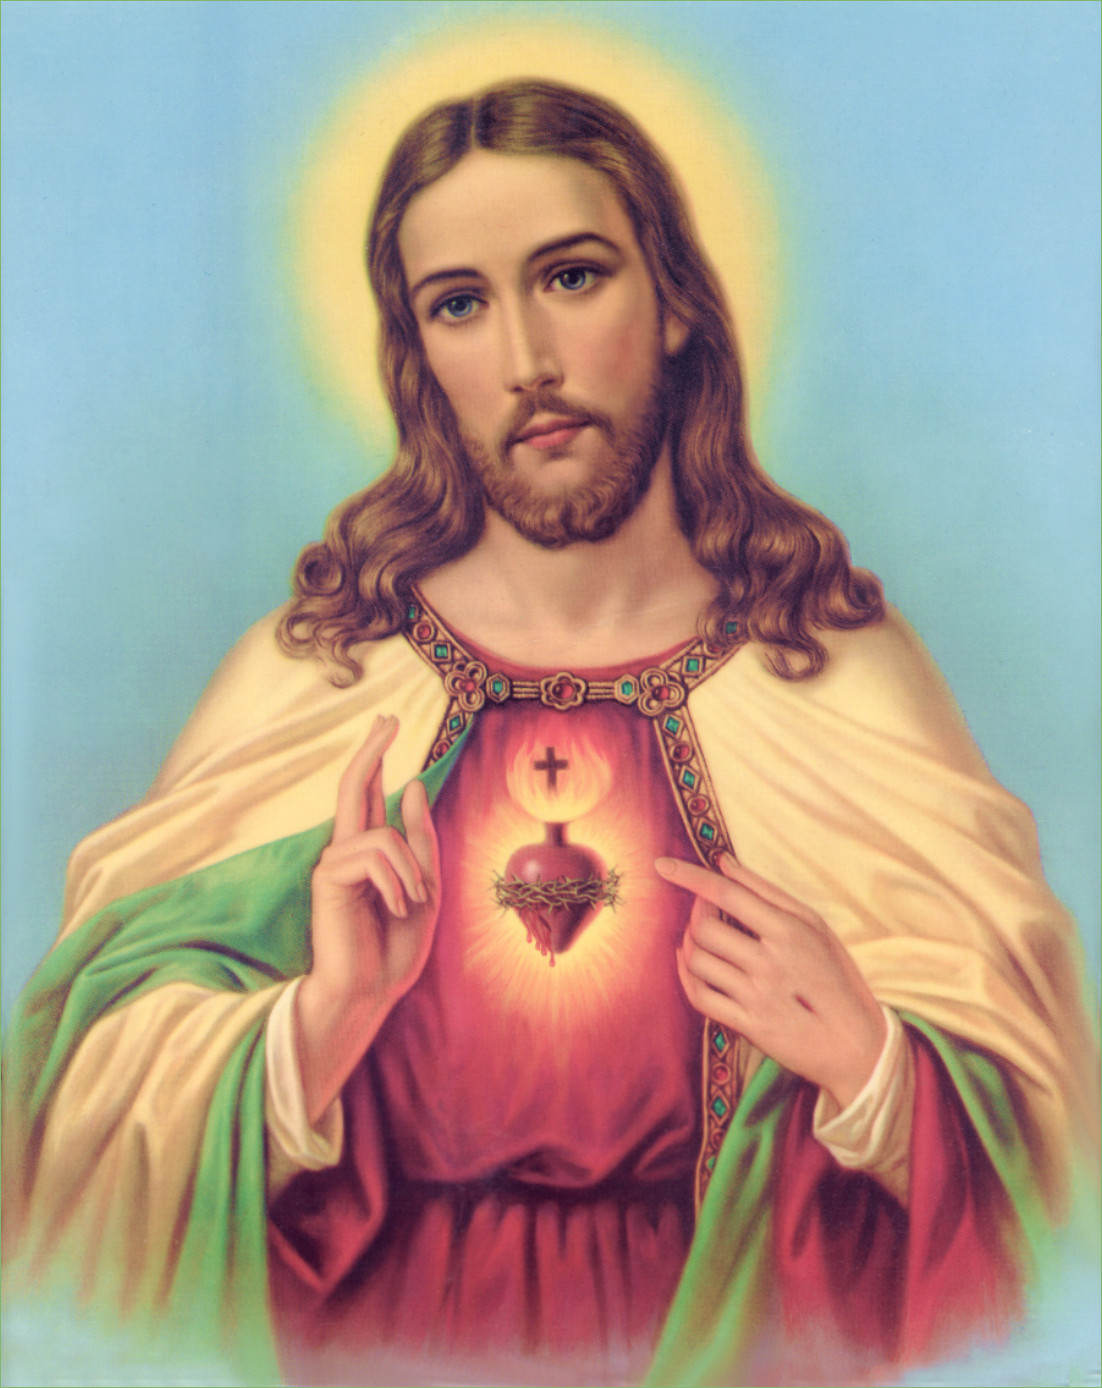 Sebechleby The Typical Catholic Image Of Heart Of Jesus Christ Stock Photo   Download Image Now  iStock